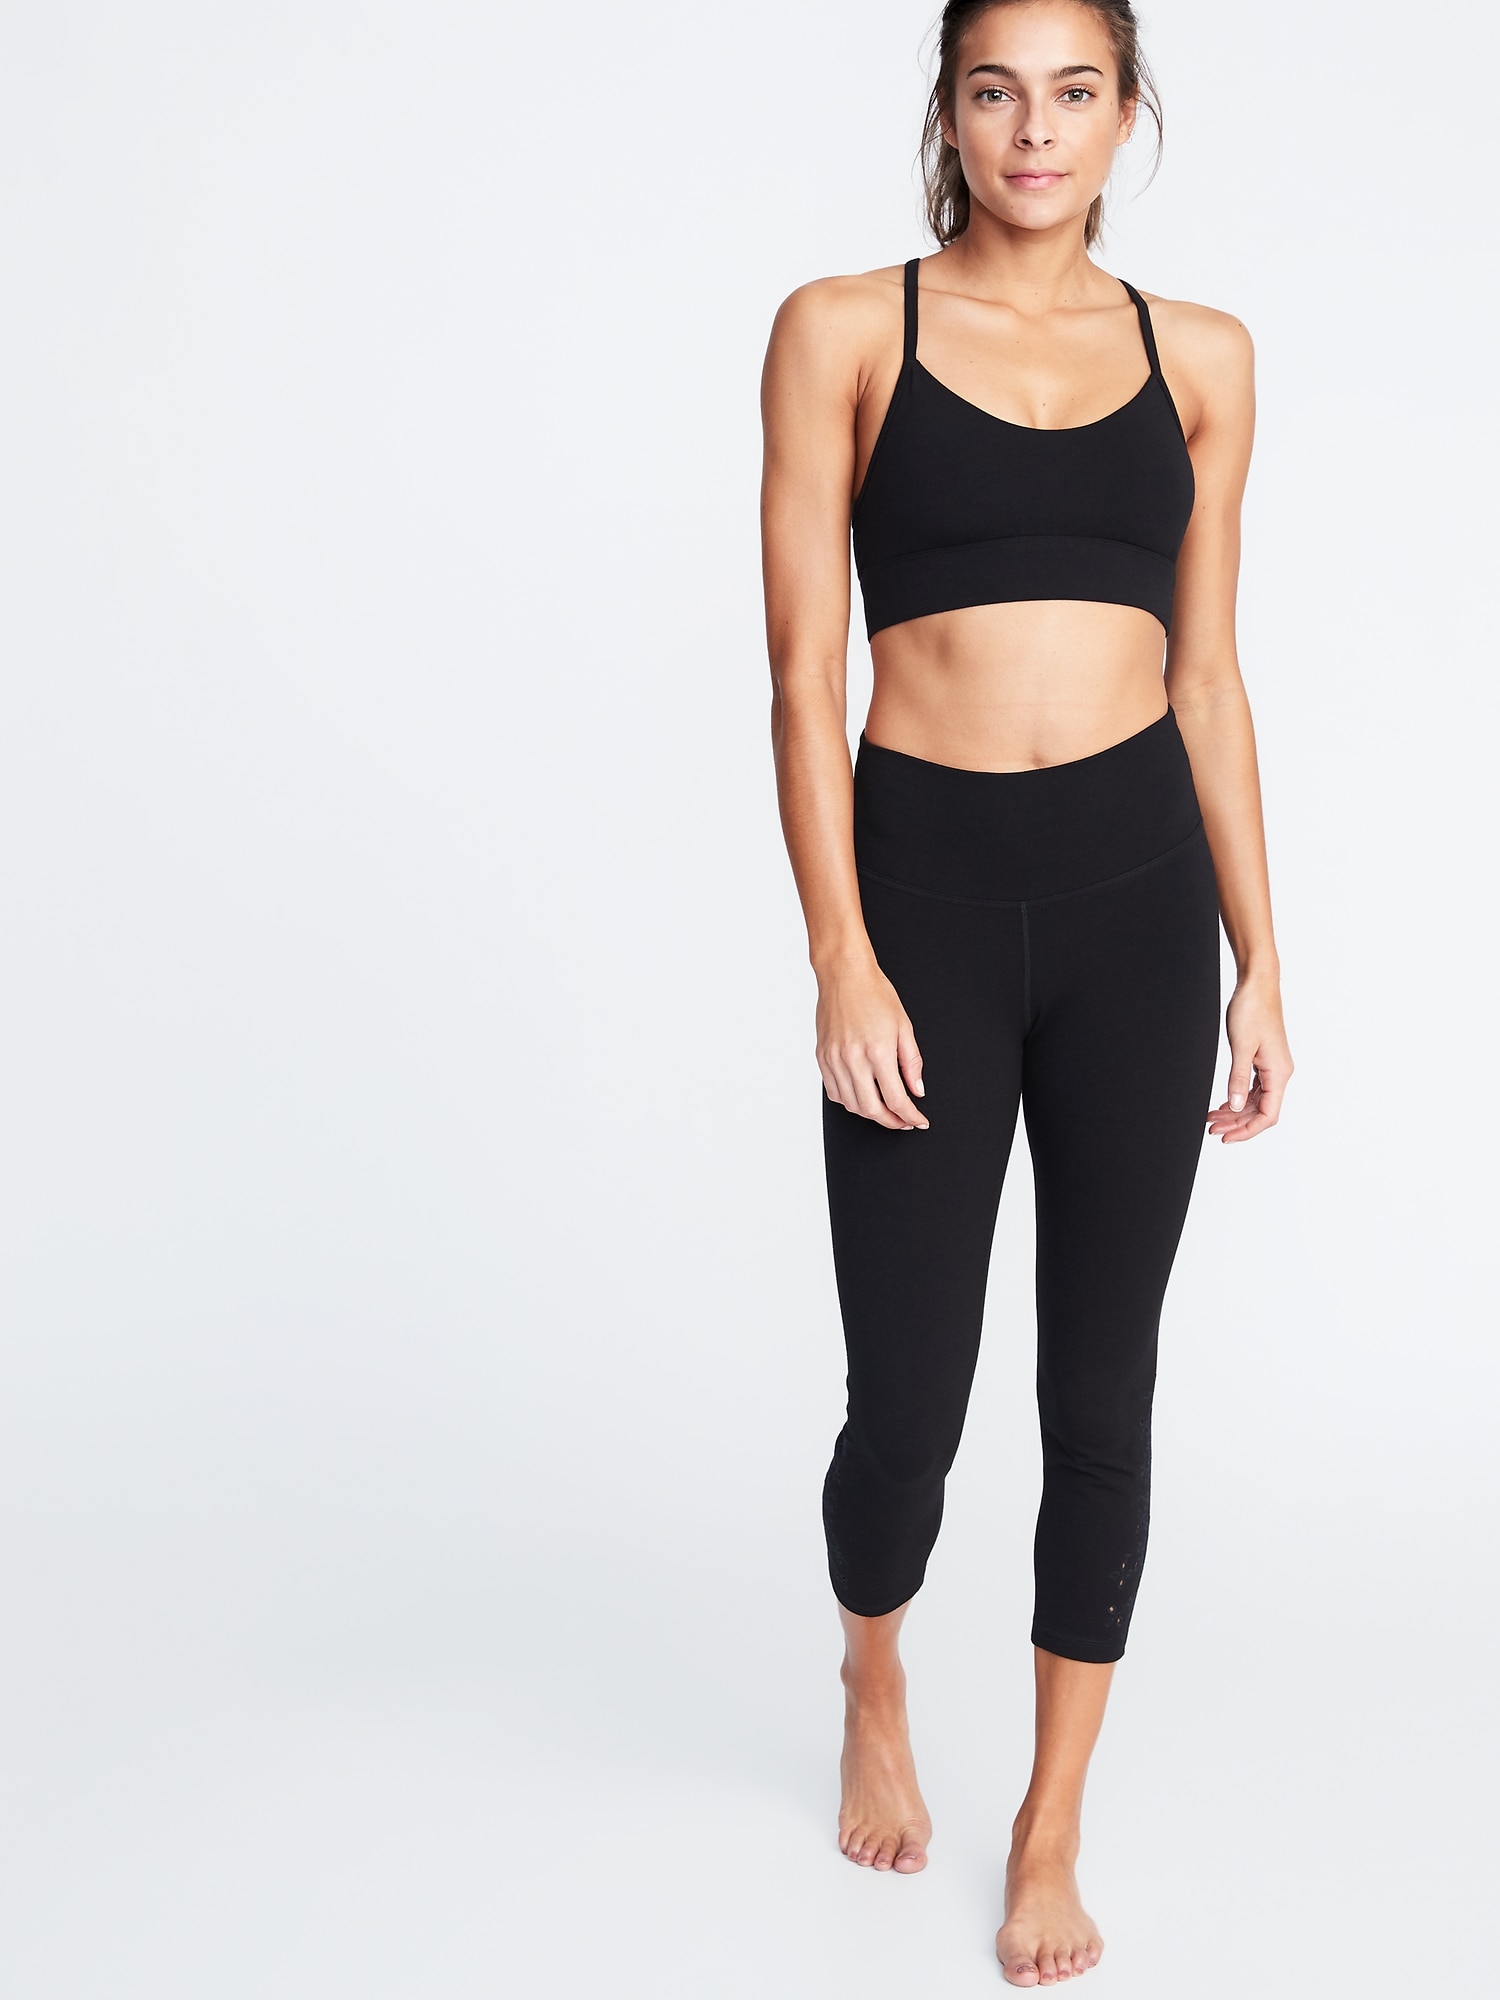 Old Navy Light Support Seamless Racerback Sports Bra - Black NWT Small  287693